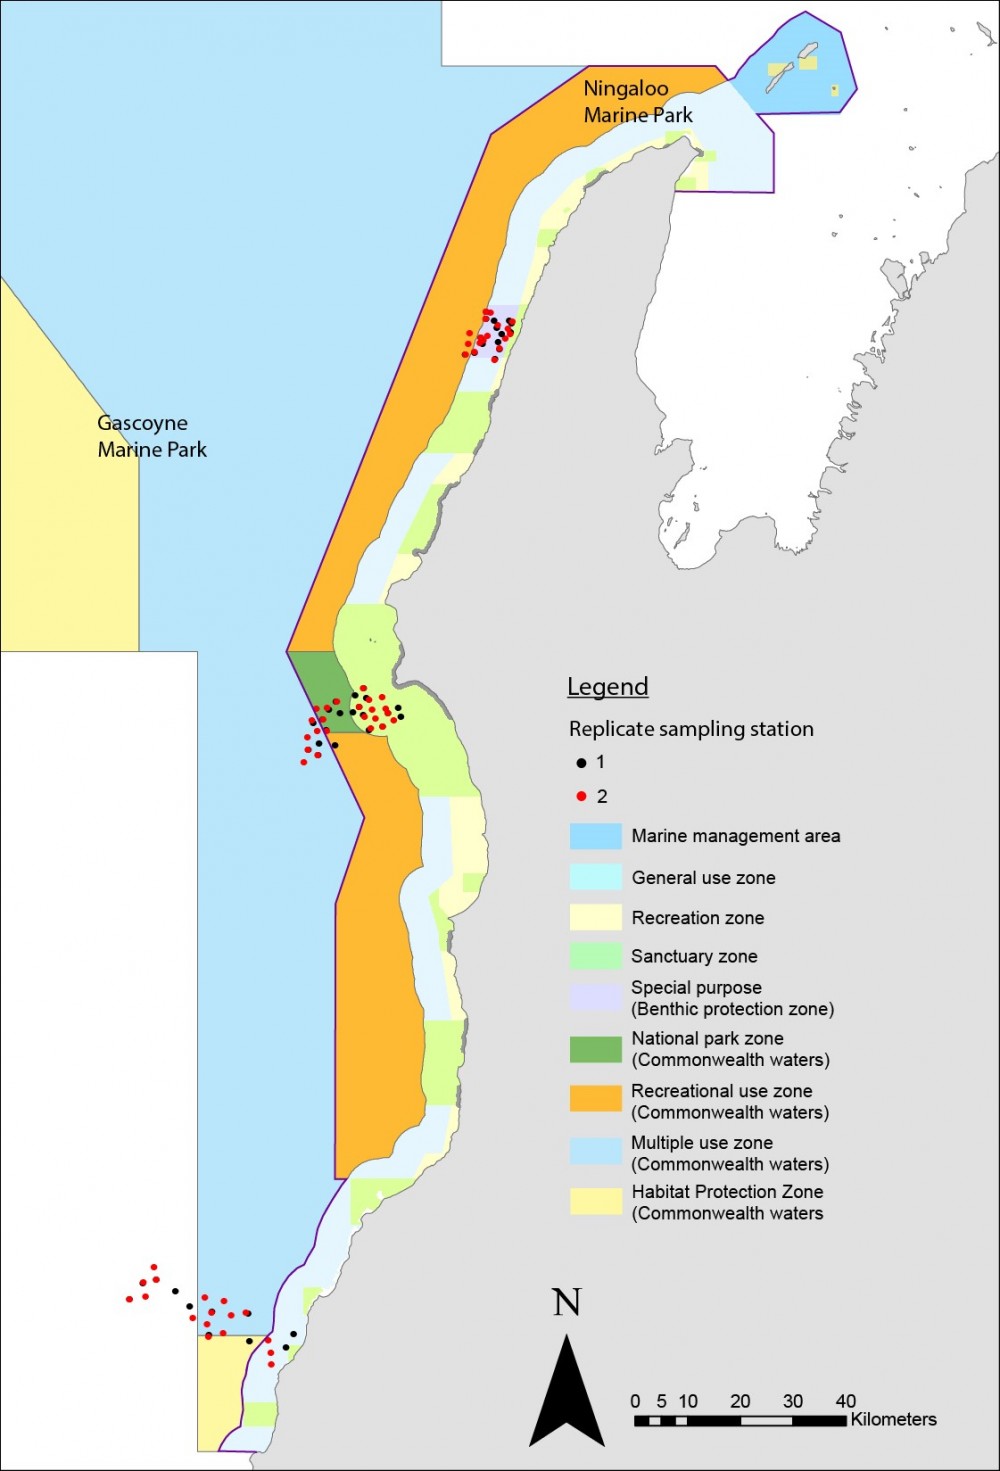 study area showing boundaries for the Ningaloo and Gascoyne Marine Parks